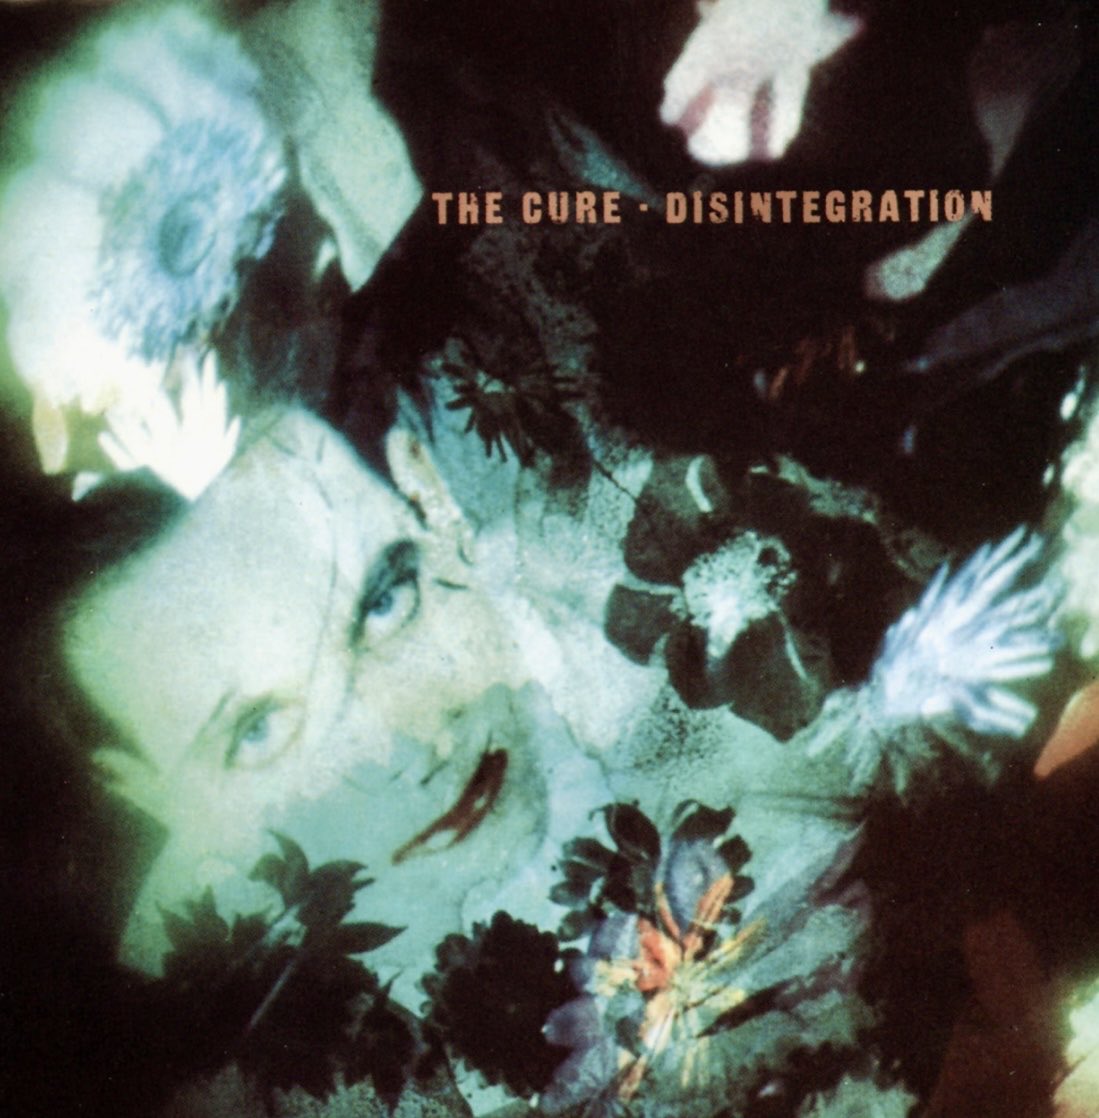 Disintegration,” the enigmatic eighth studio album by English rock legends The Cure, emerged into the world on May 2, 1989, through Fiction Records. This pivotal work was crafted at Hookend Recording Studios, nestled in the picturesque Checkendon, Oxfordshire.